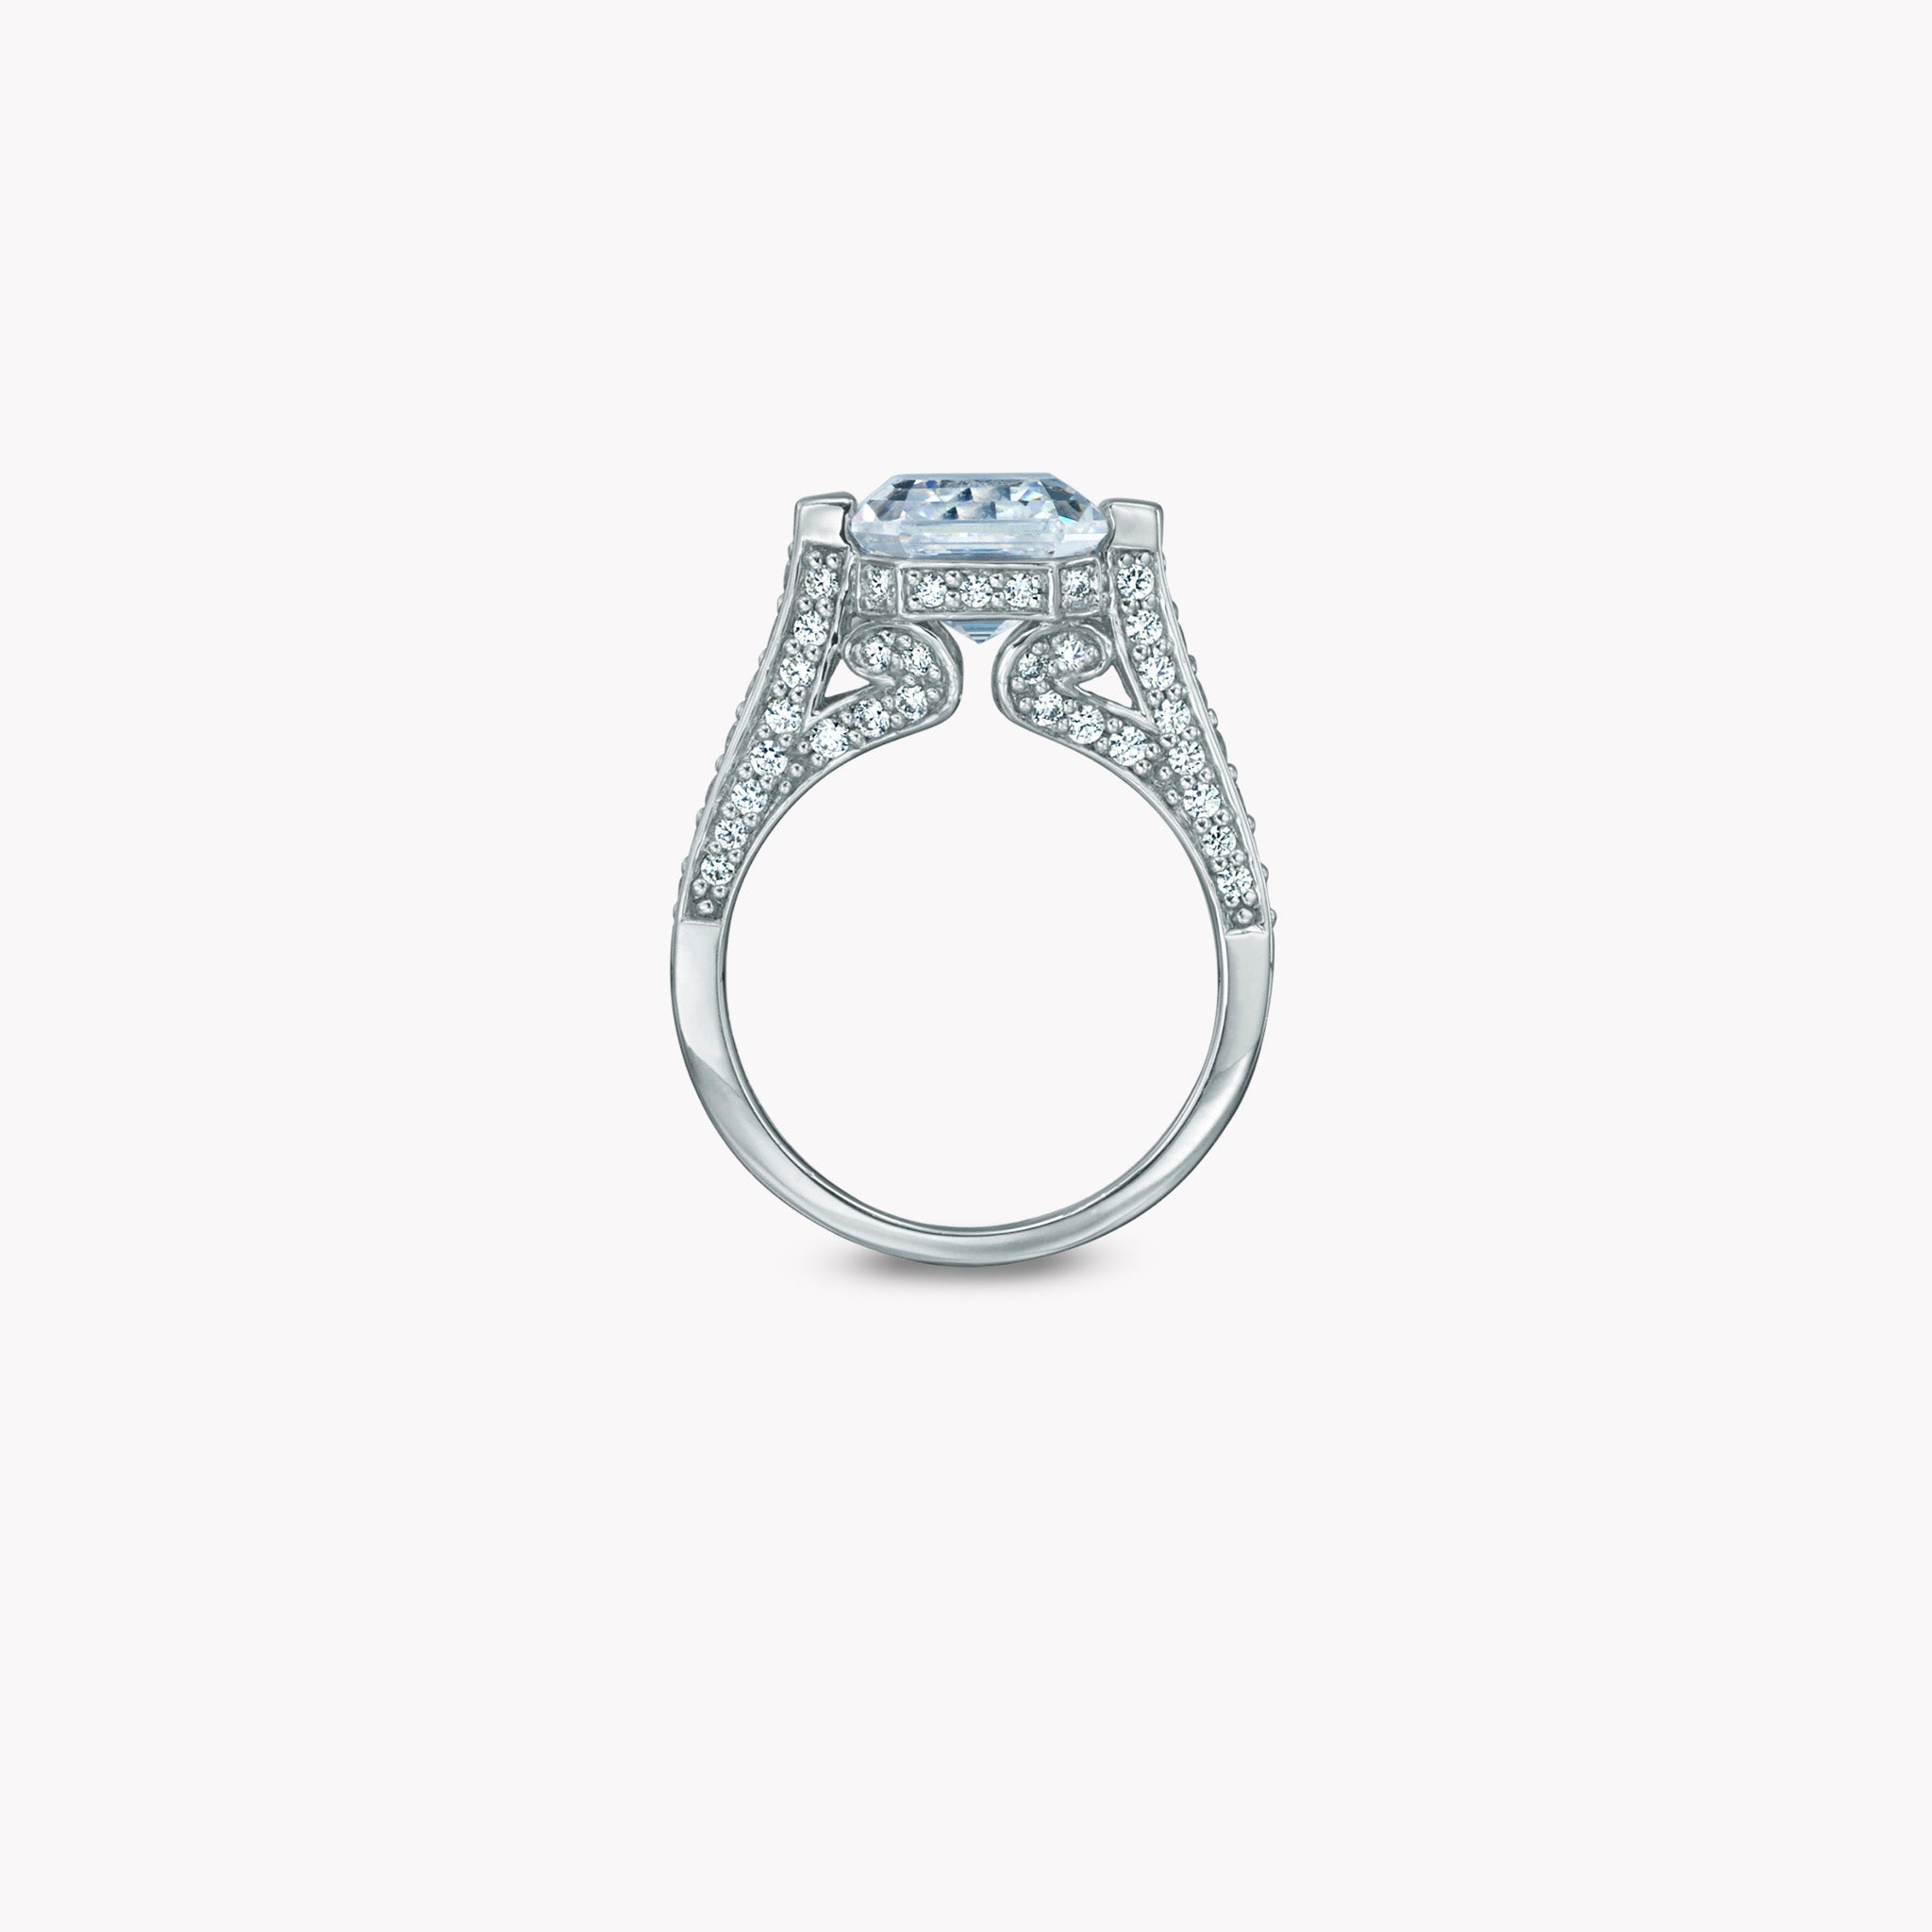 DANI 'Regal' Ring with Pave